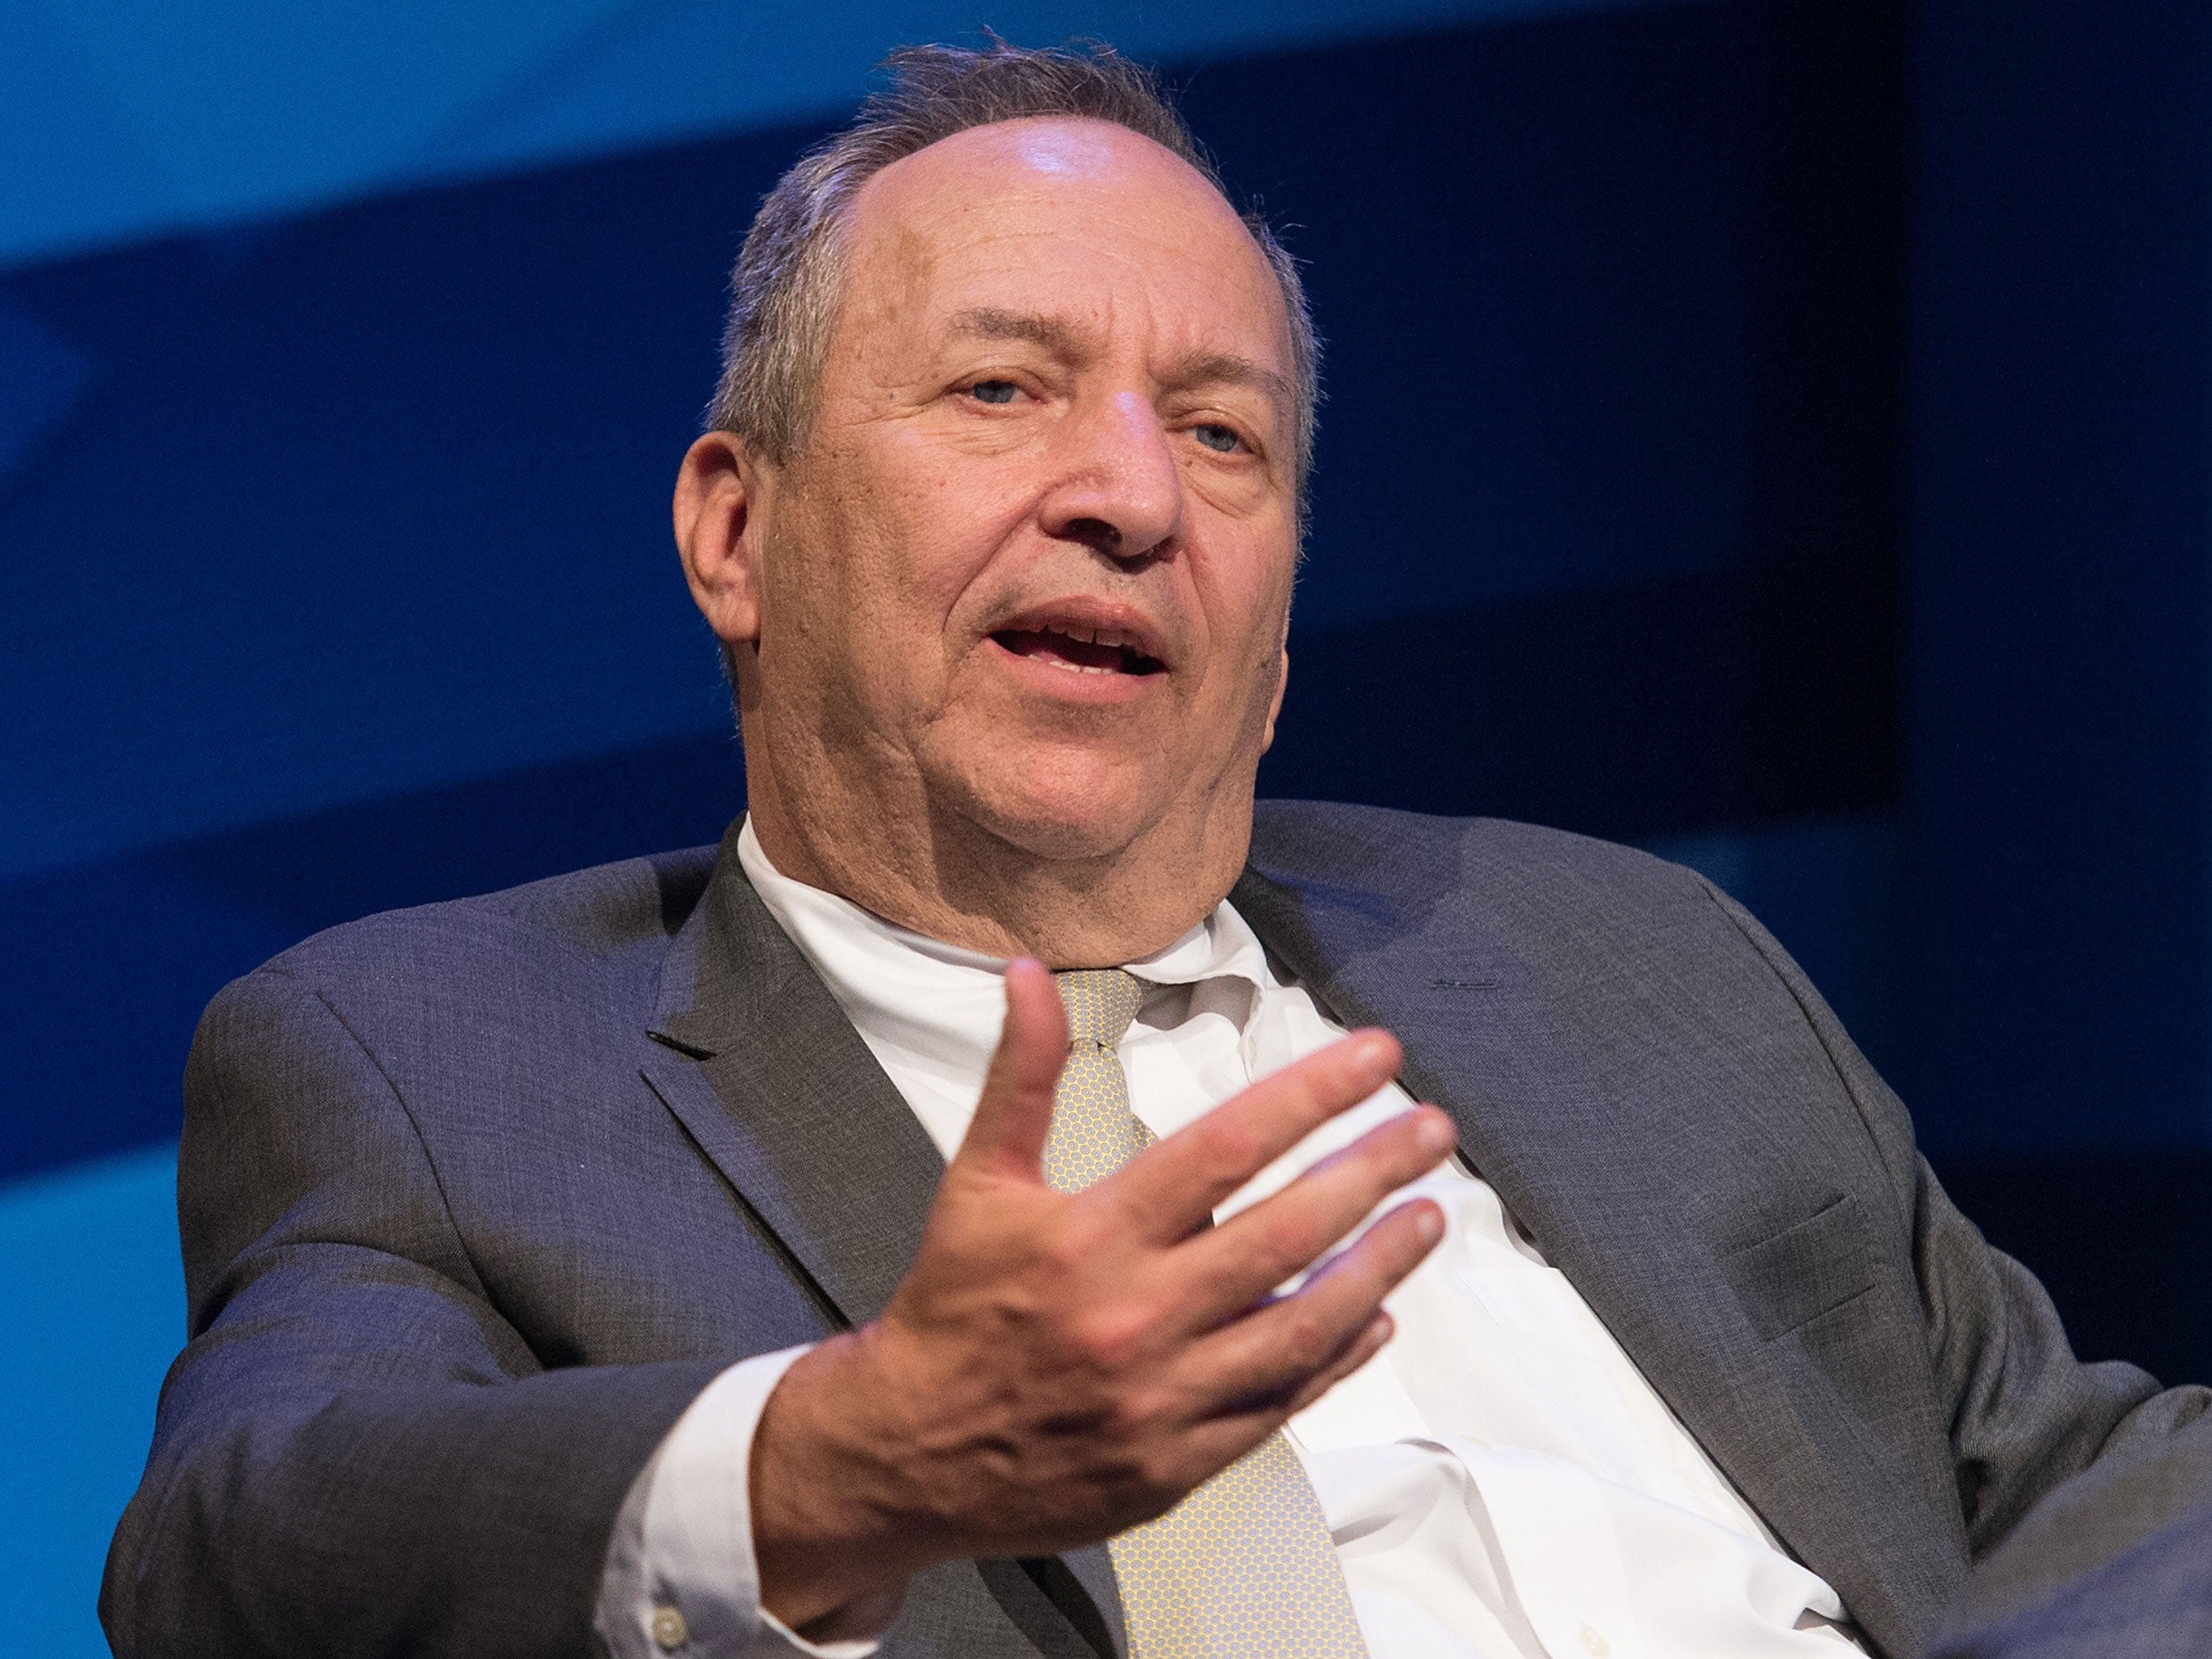 Larry Summers has previously warned about the consequences of a crash in China